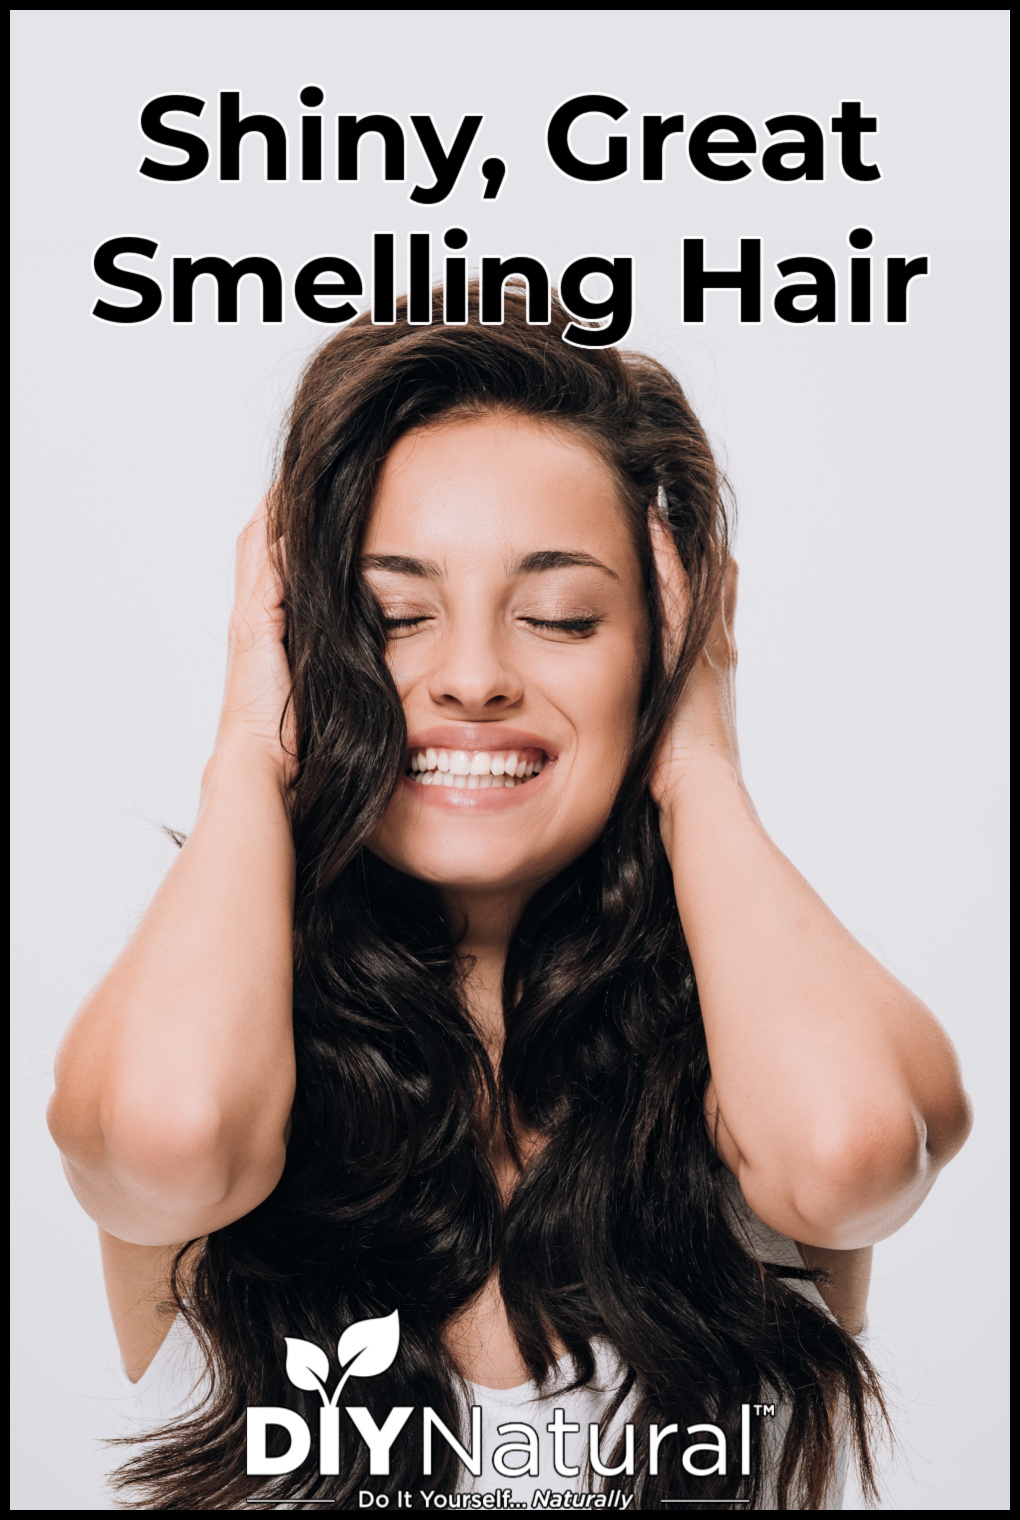 Shiny Hair: Follow These 3 Simple Steps for Shiny, Great Smelling Hair